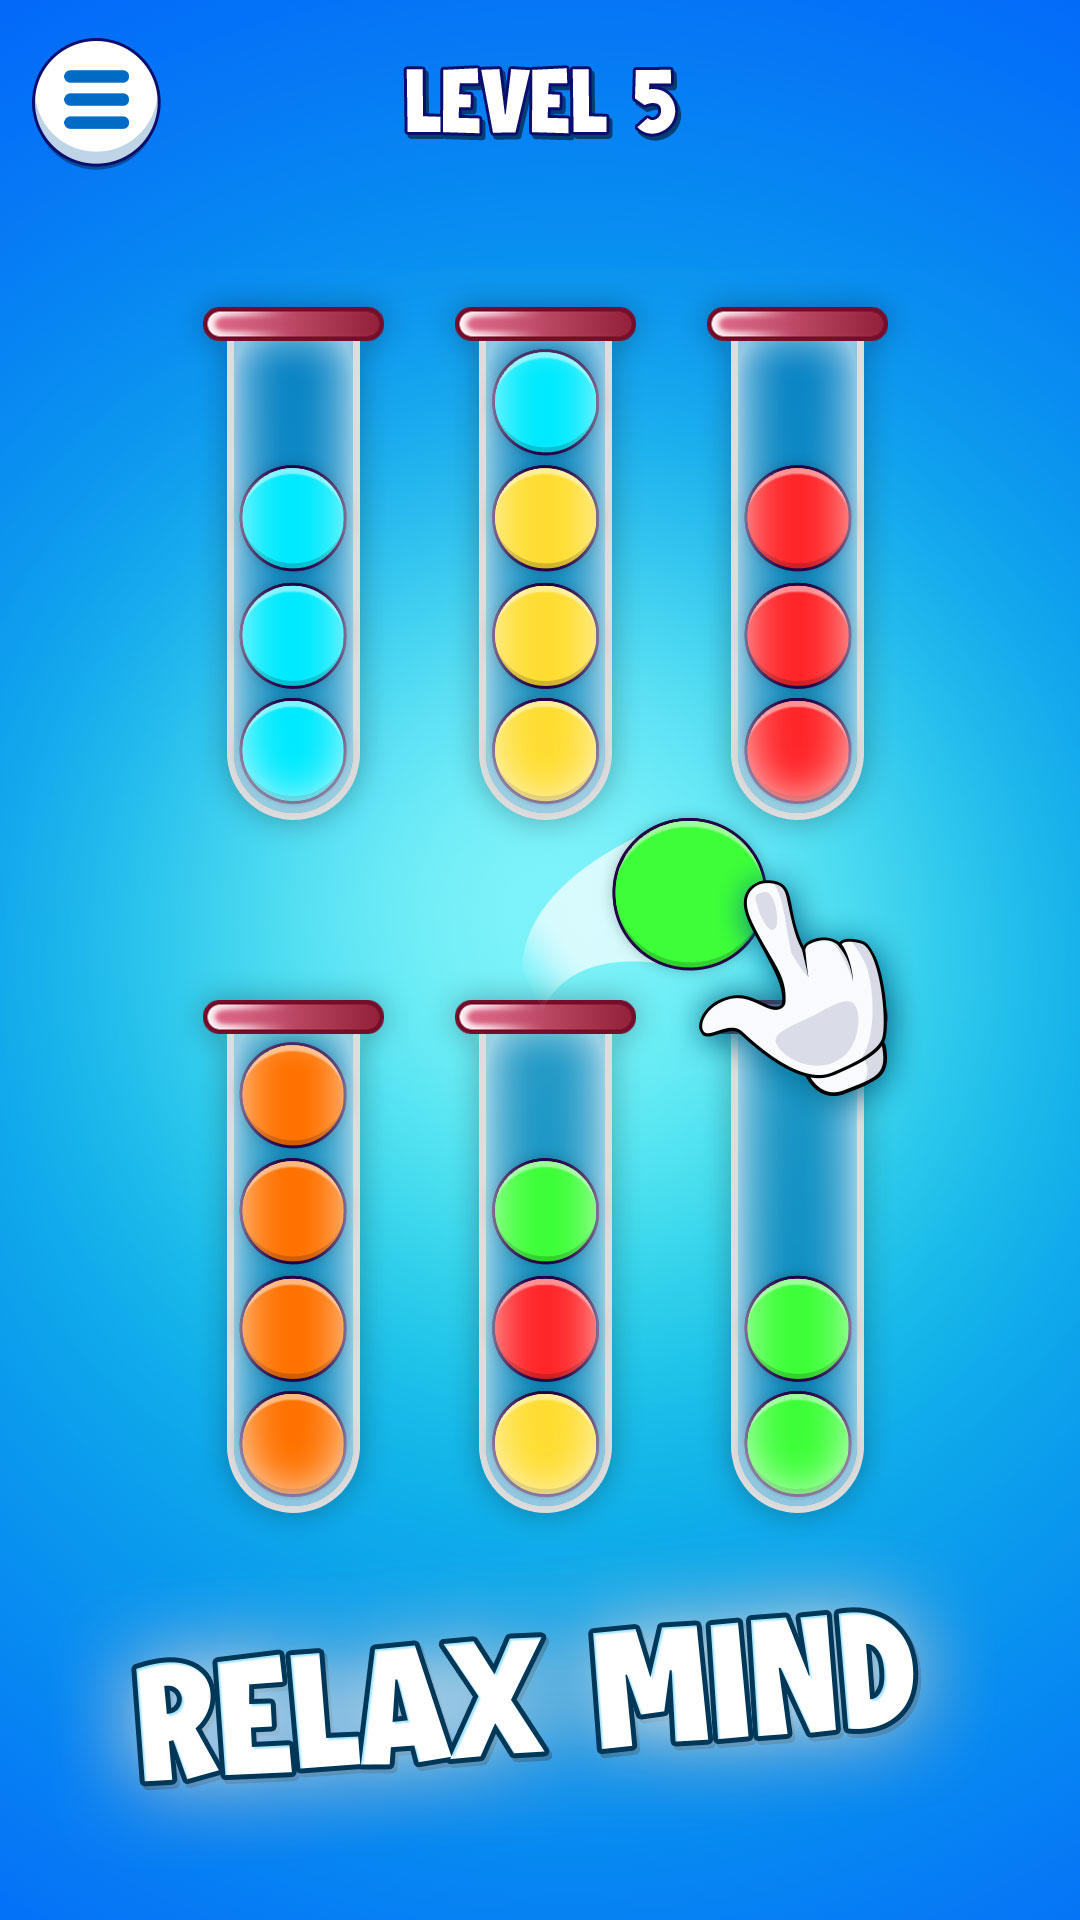 Ball Sort Puzzle - Color Games APK para Android - Download